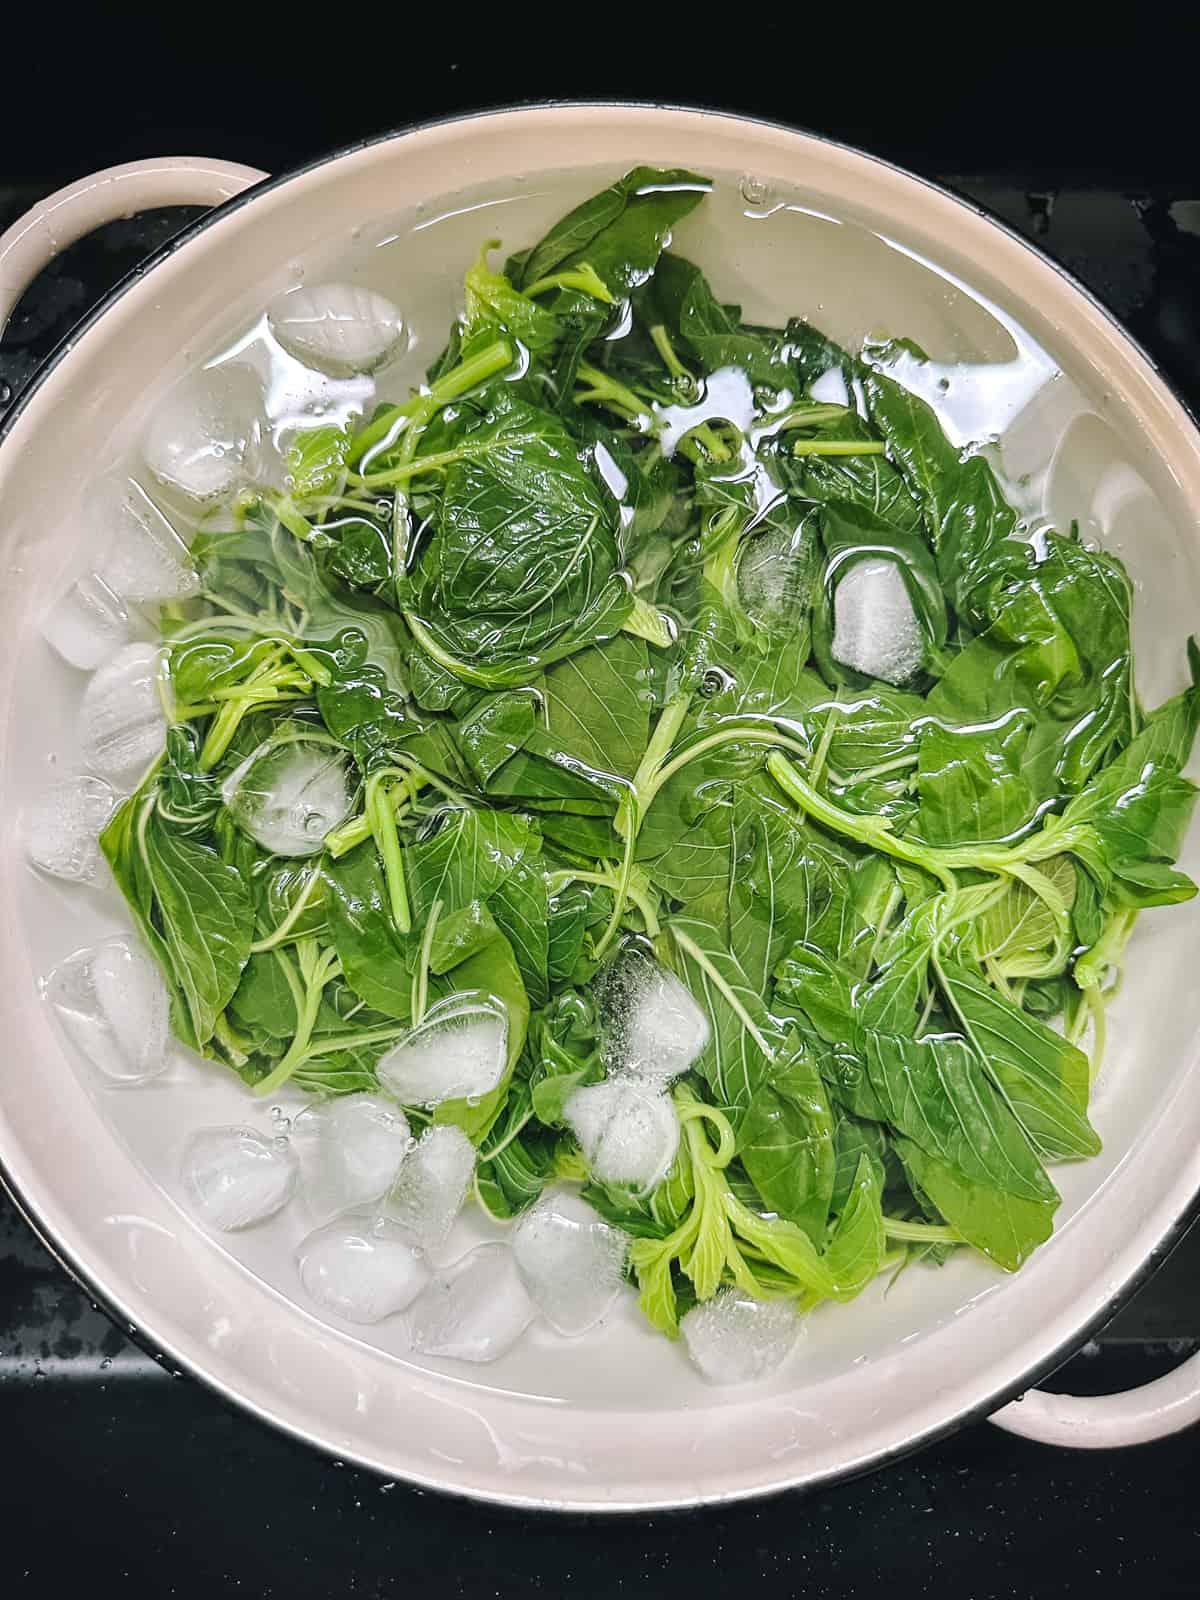 Cooked greens in a large pot filled with water and ice cubes.